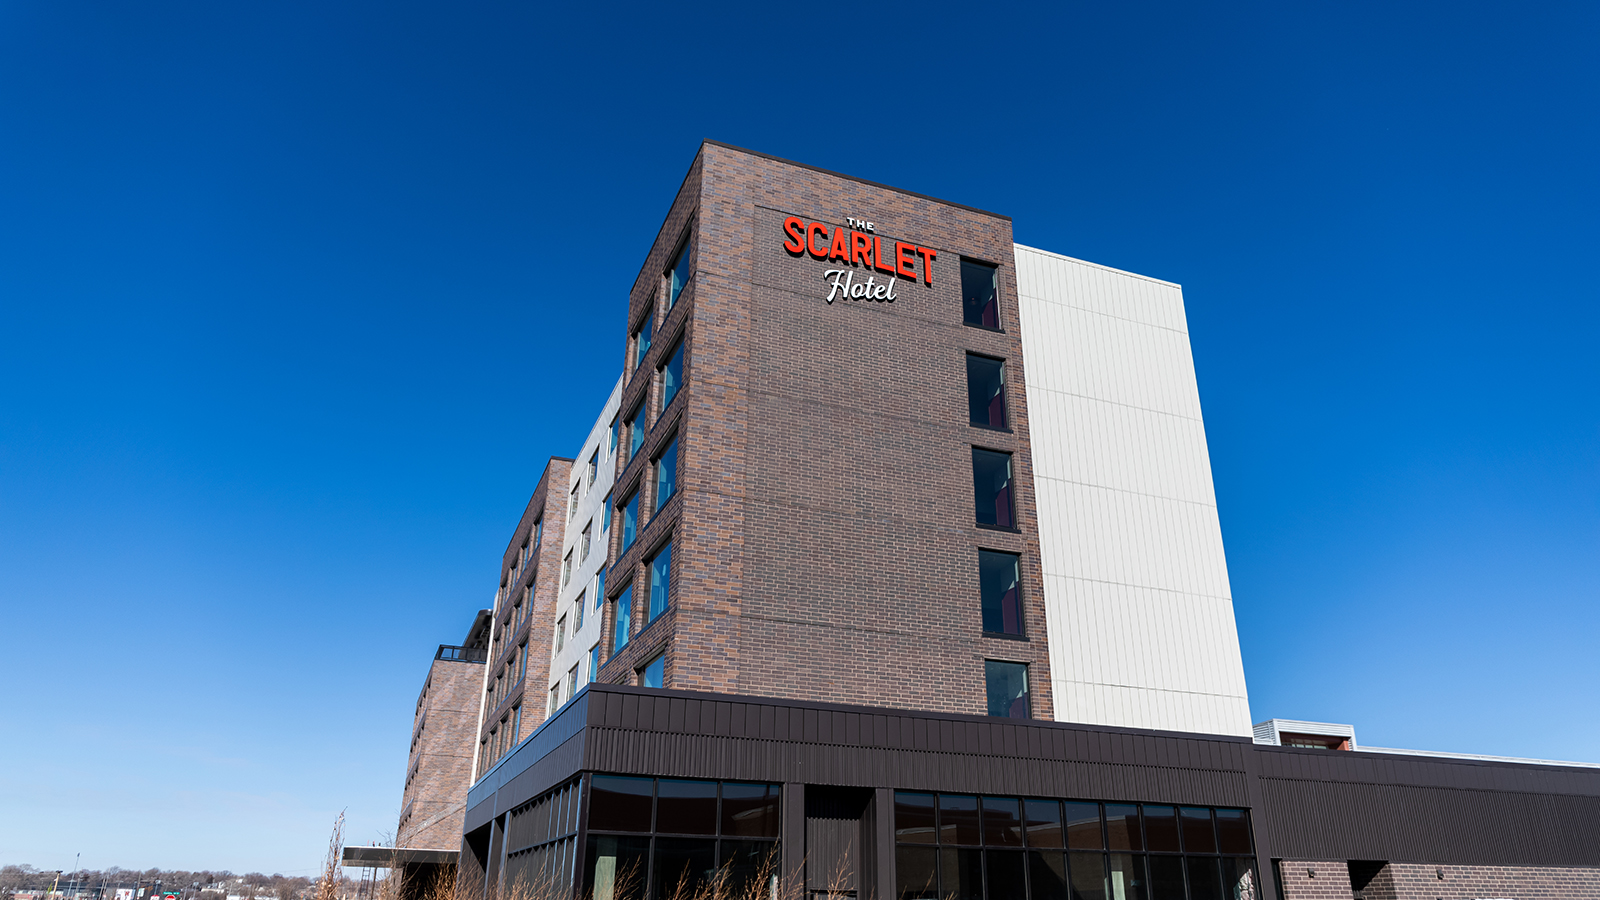 Scarlet Hotel exterior image with blue sky